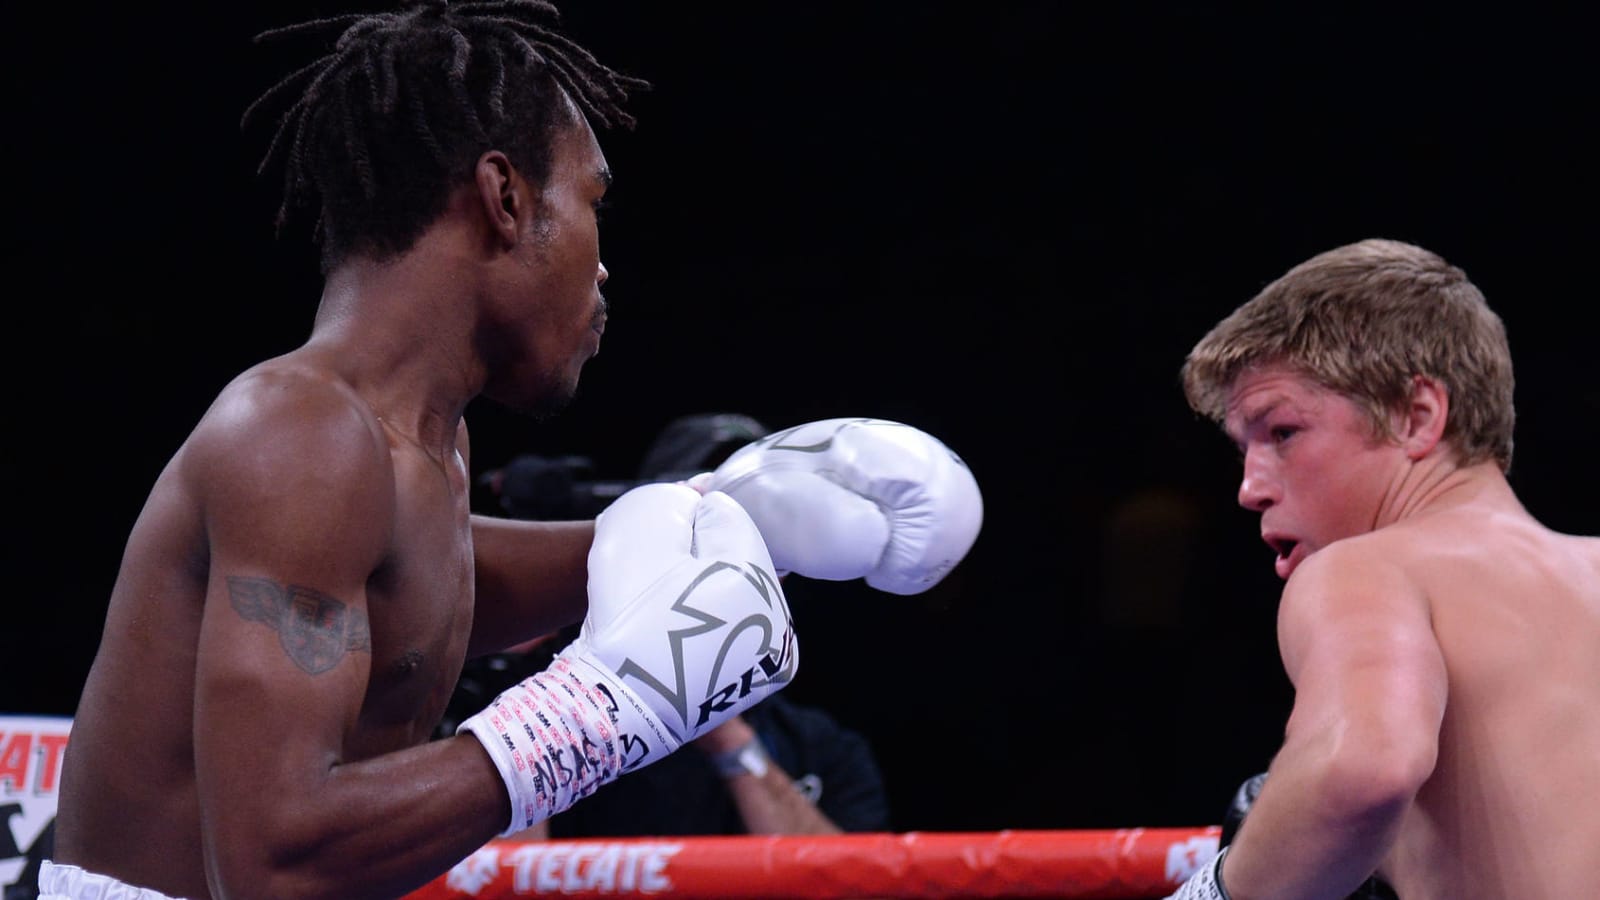 Watch: Evander Holyfield’s son Evan crushes opponent in pro boxing debut